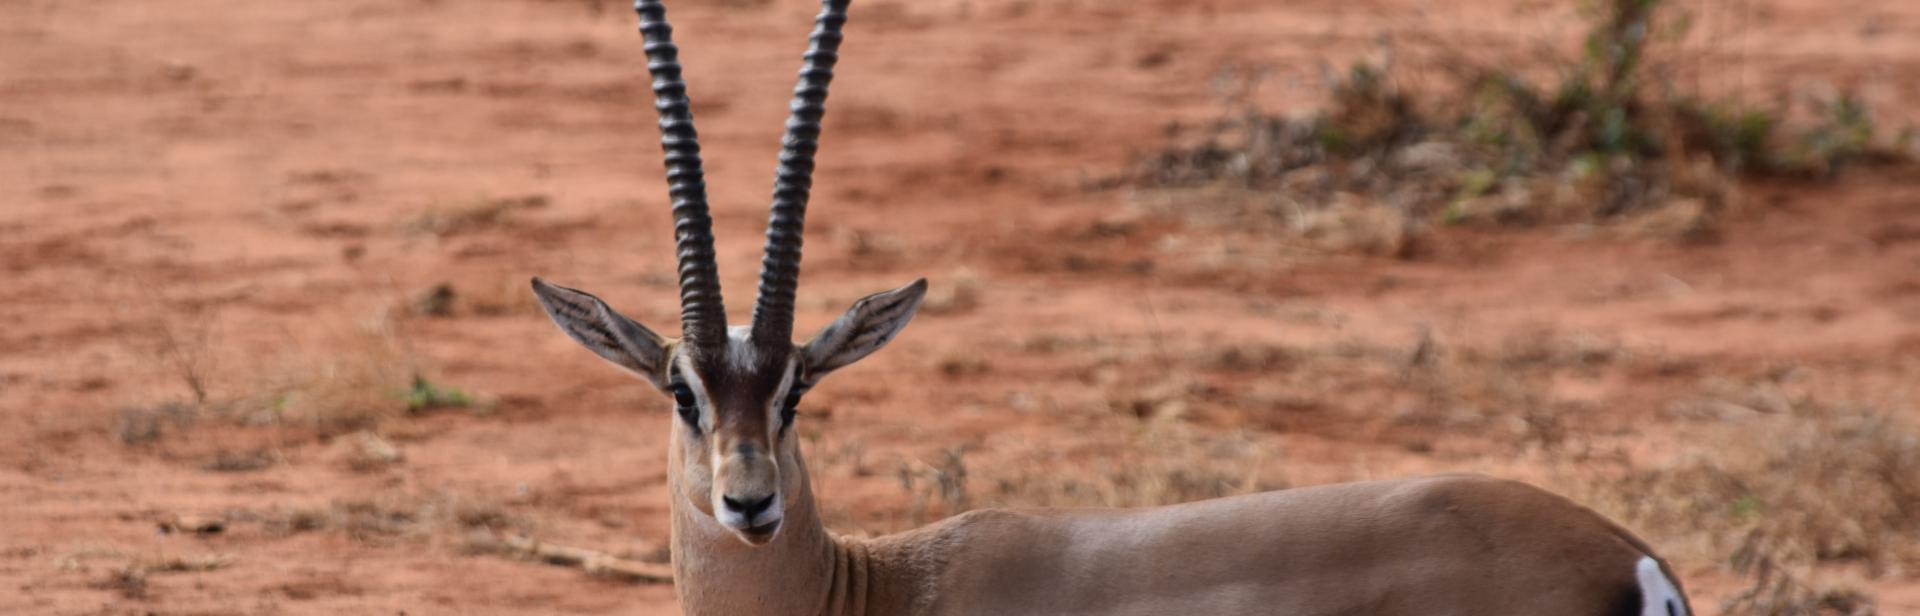 a long-horned gazelle stares at the camera. the horns are almost as tall as the brown and white gazelle. the background is a savannah with tall orange grasses and brush